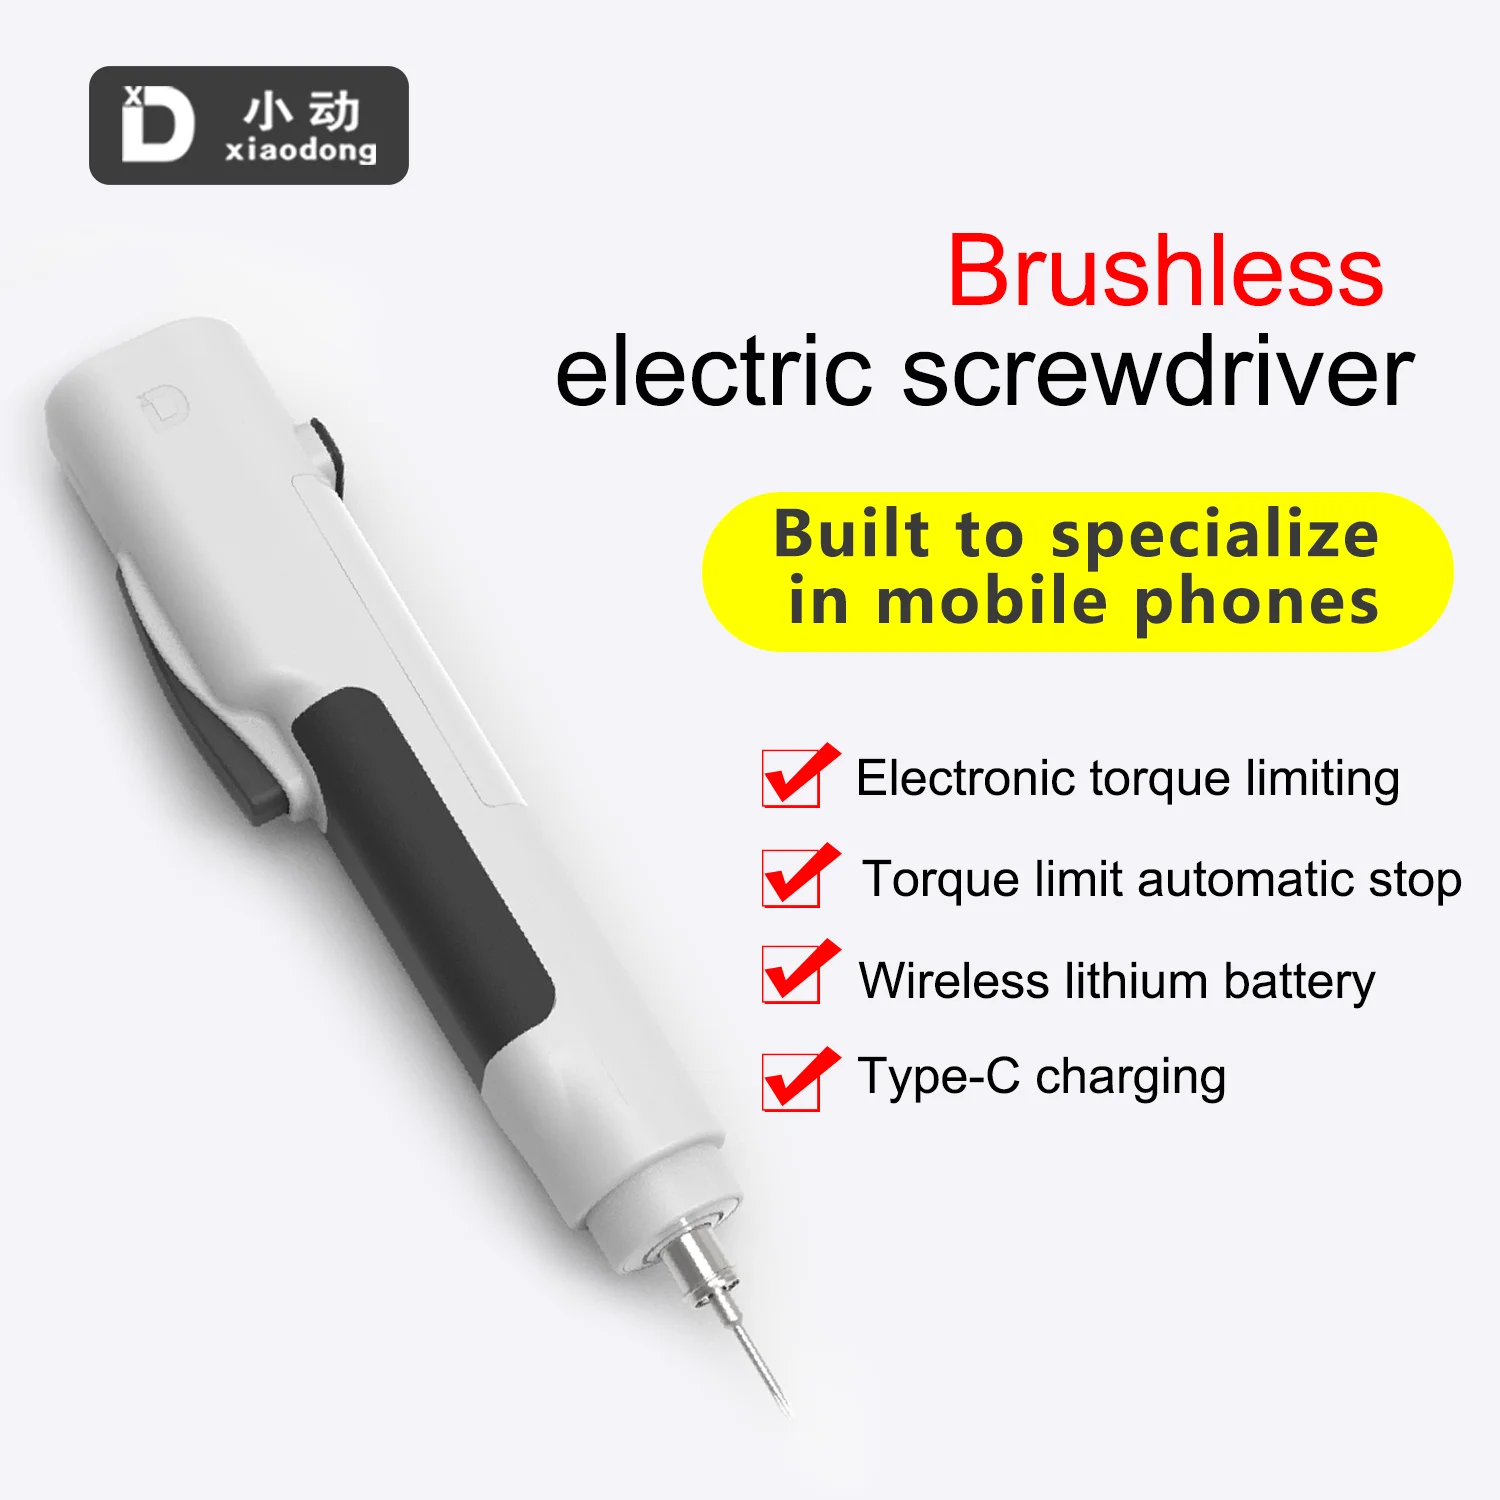 Xiaodong P1 Electric Screwdriver Professional Disassembly Tool for IPhone Android Huawei Phones Tablets Repair Opening Tools 3 in 1 wireless lavalier microphones for iphone android